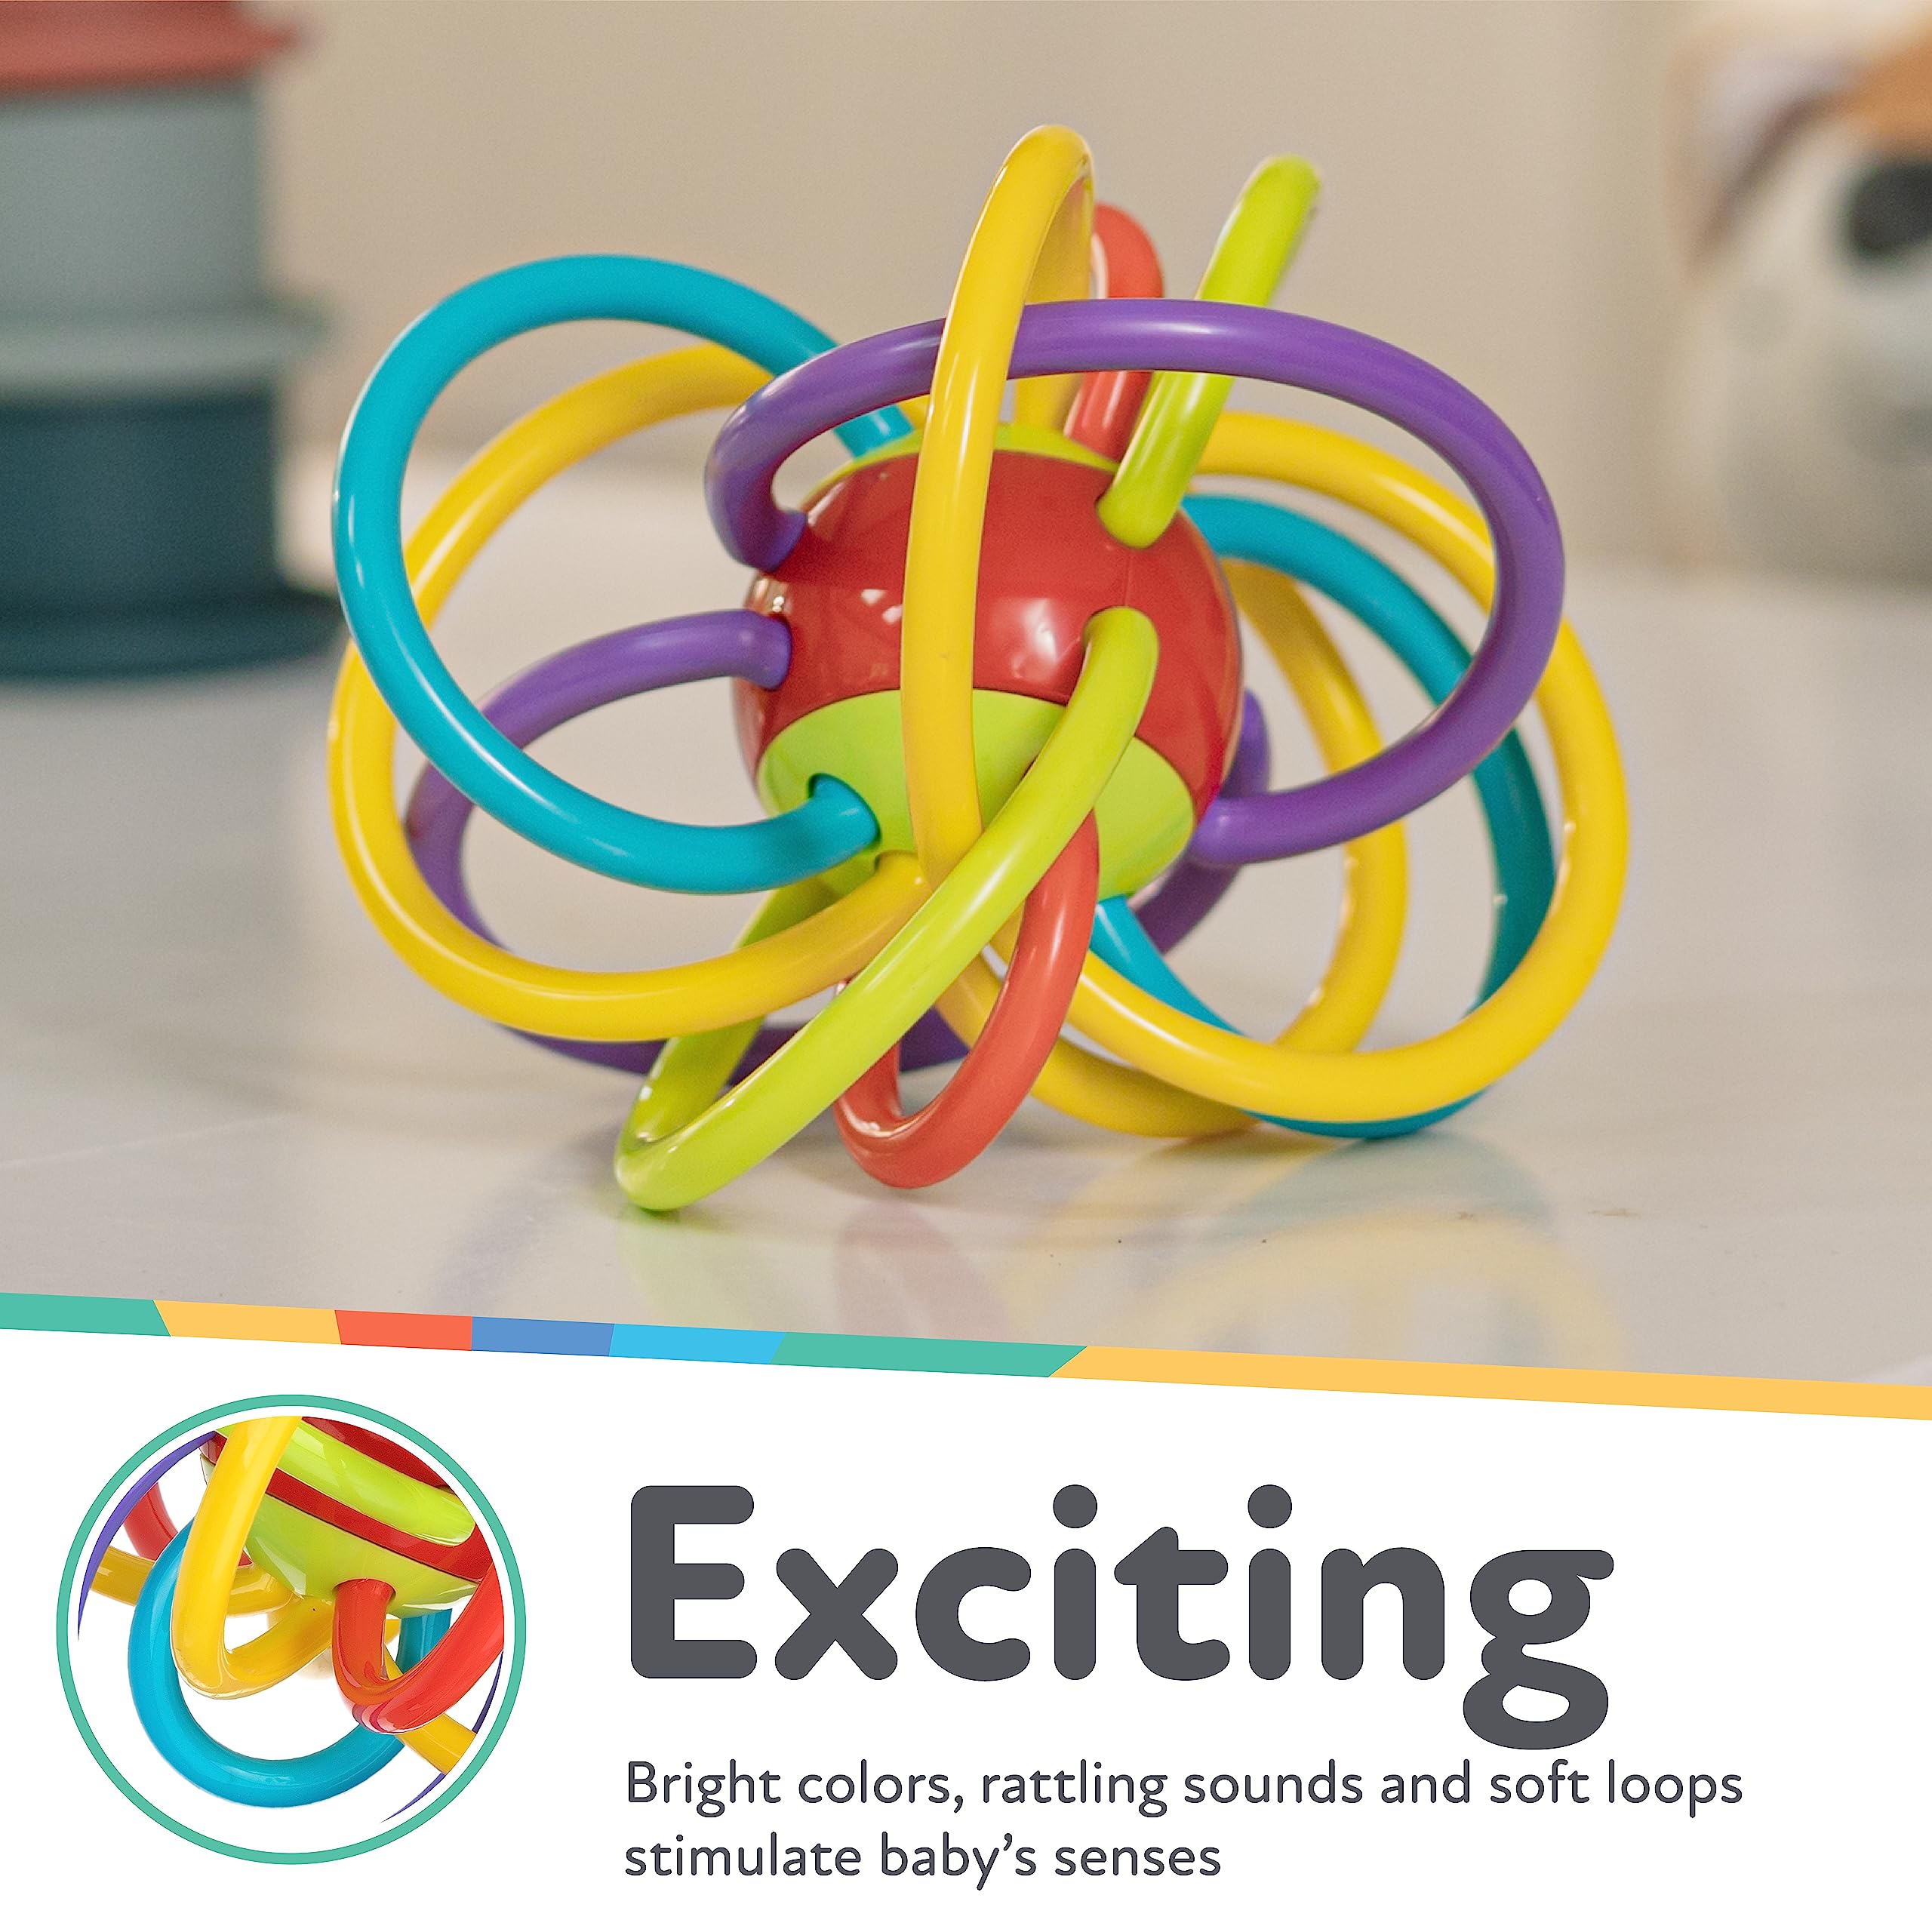 Nuby Lots A Loops Sensory Multicolor Teether Toy and Rattle for Baby and Toddler, 3M+